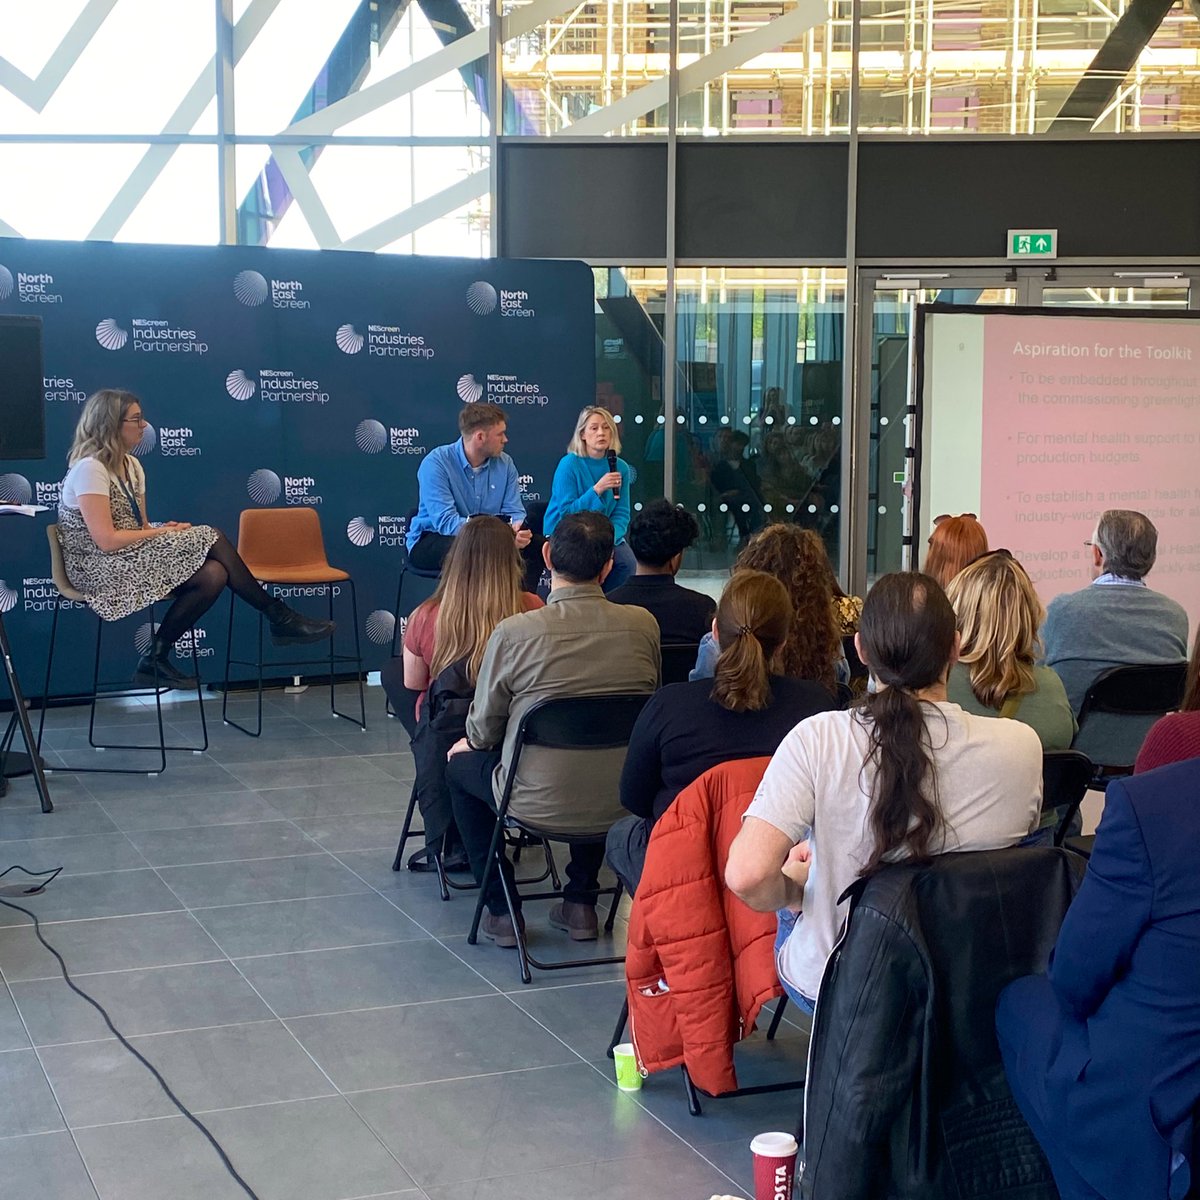 To kick off the event we have Jess Cudlipp and Jake Dawson from the @FilmTVCharity to talk about the support the charity provides to those involved in the screen industry. You can learn more about the amazing work they do here: bit.ly/3NSysvG